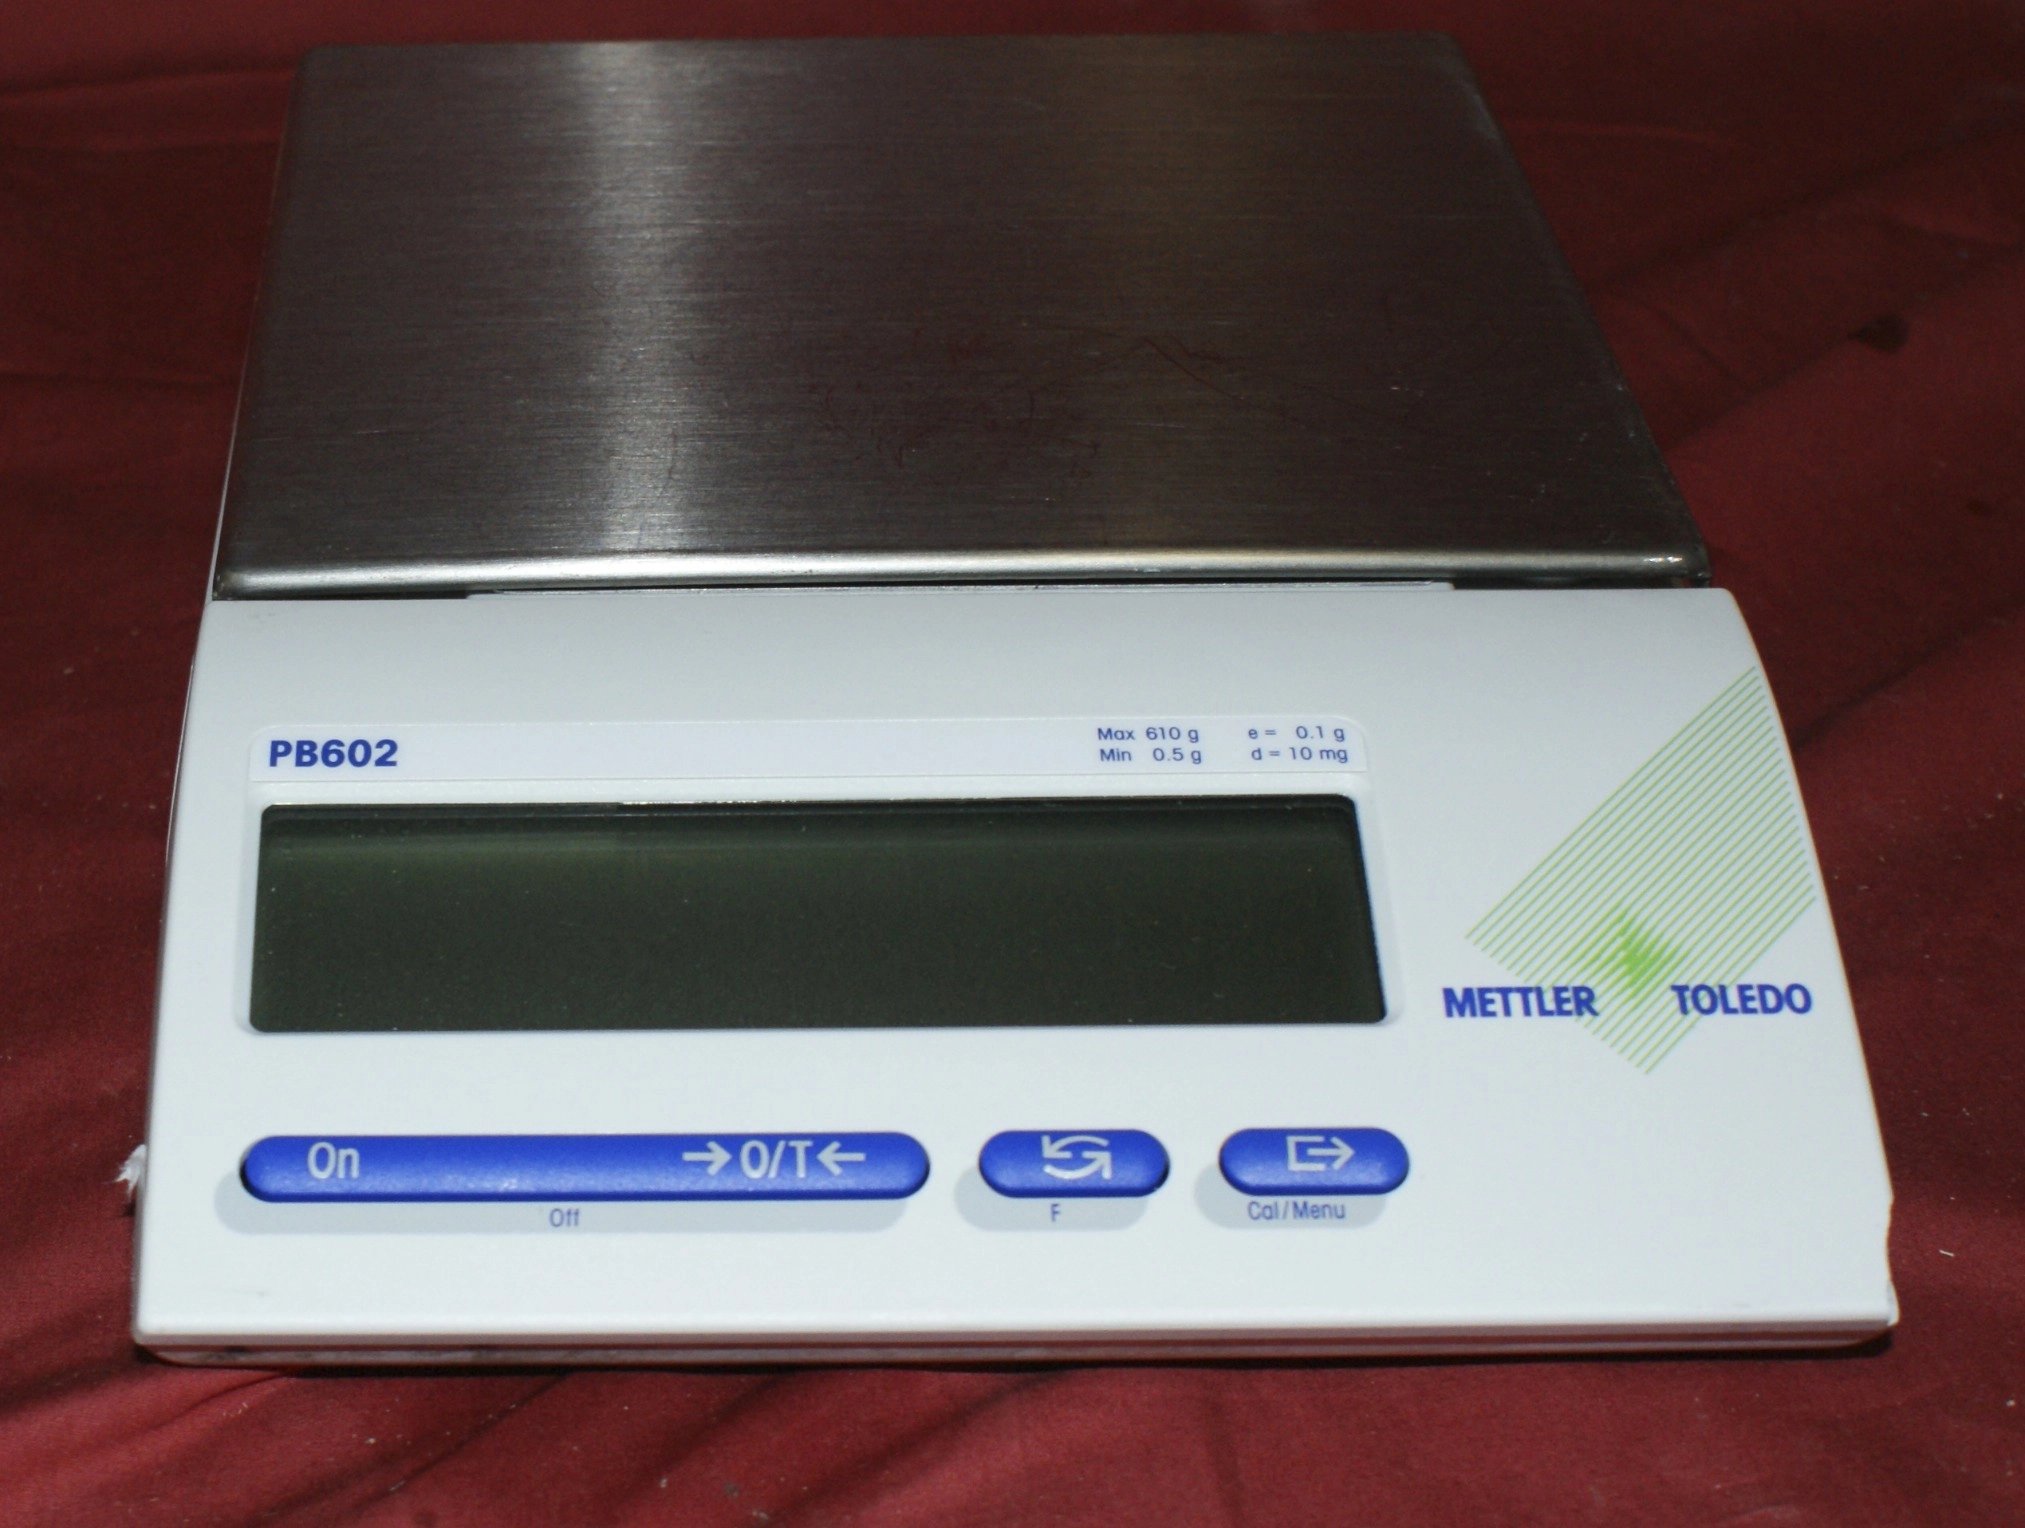 Mettler Toledo PB602 Balance tested and working with power supply